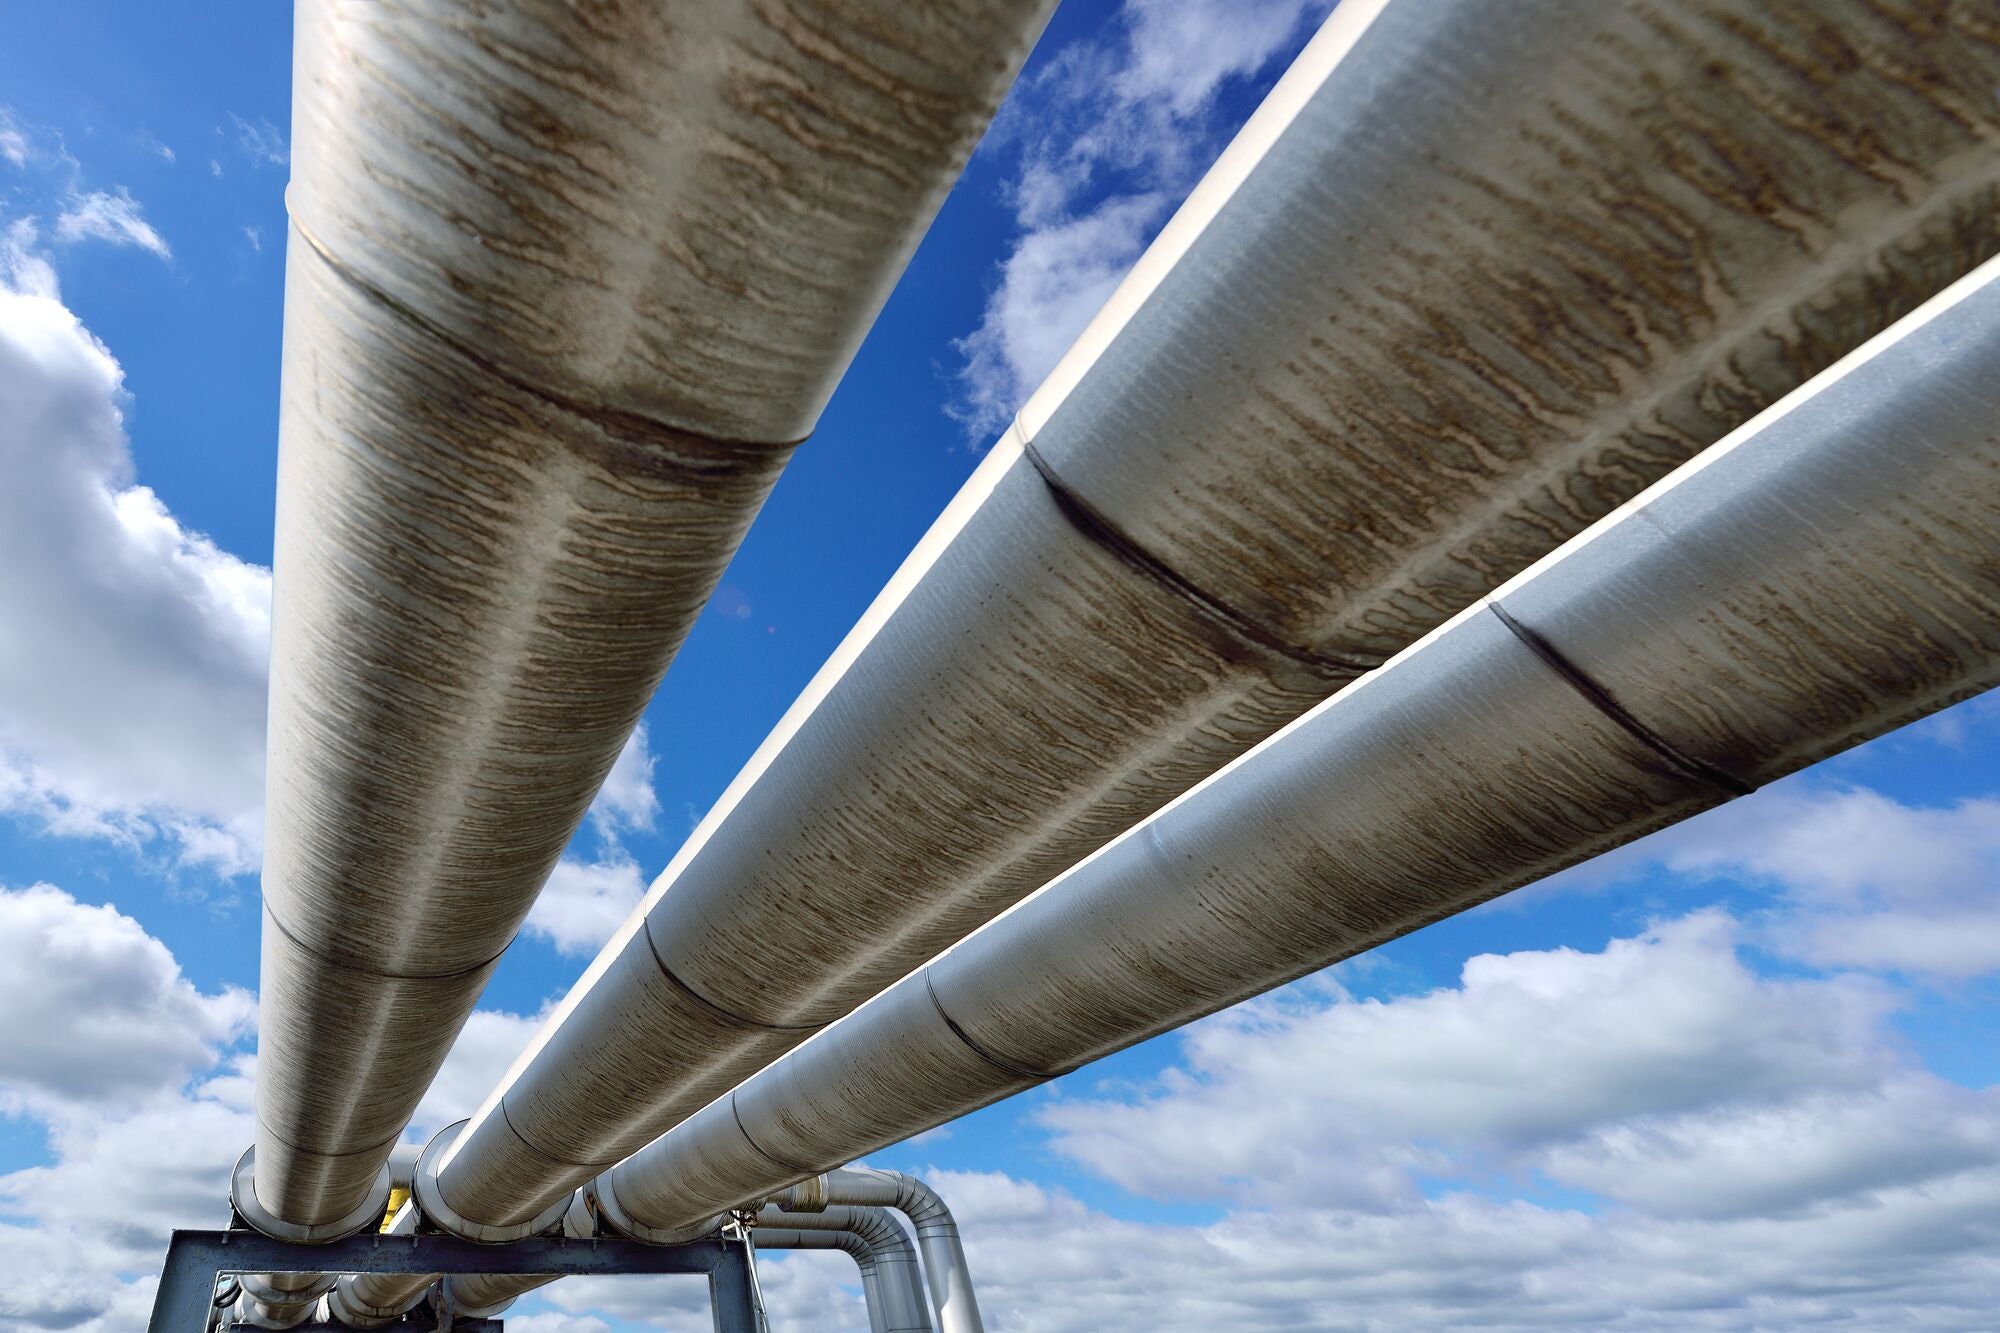 Three pipelines reflecting blue sky. (zorazhuang for Getty Images)